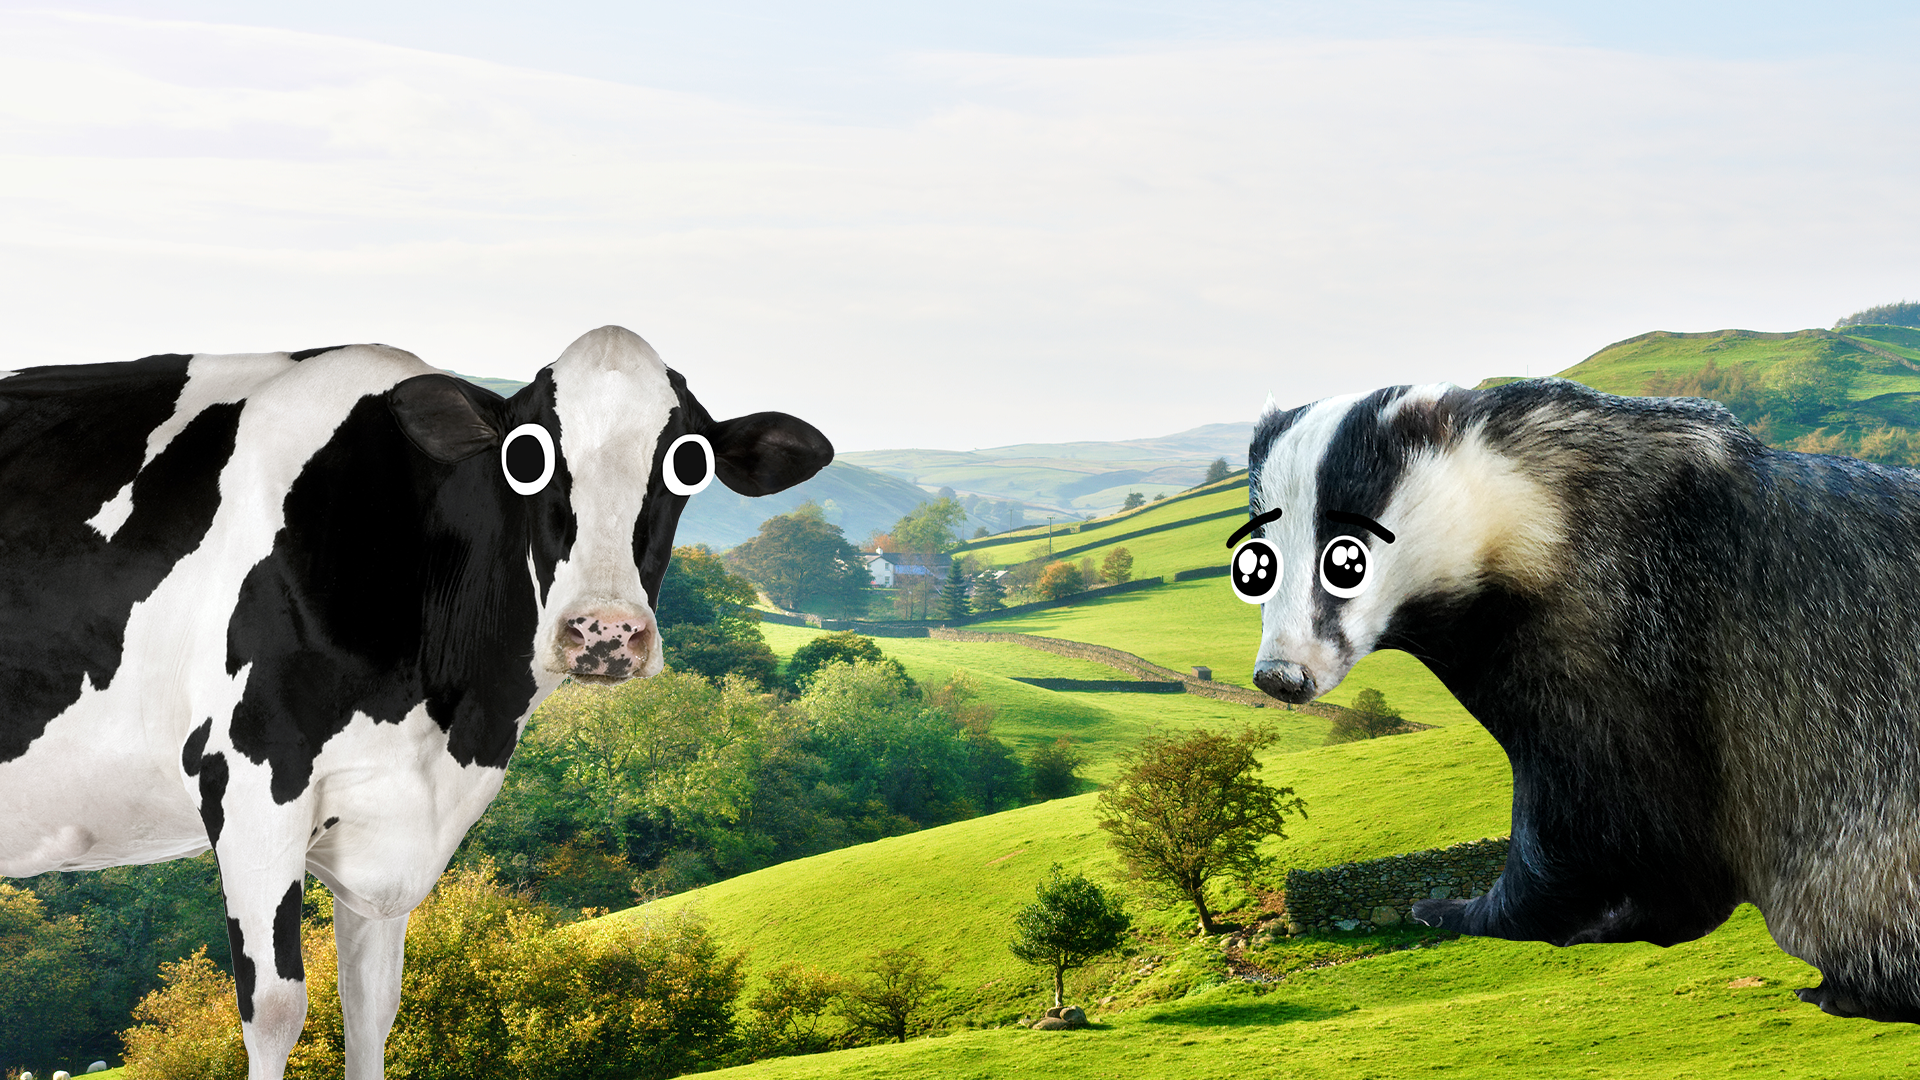 An English countryside scene with Beano cow and badger